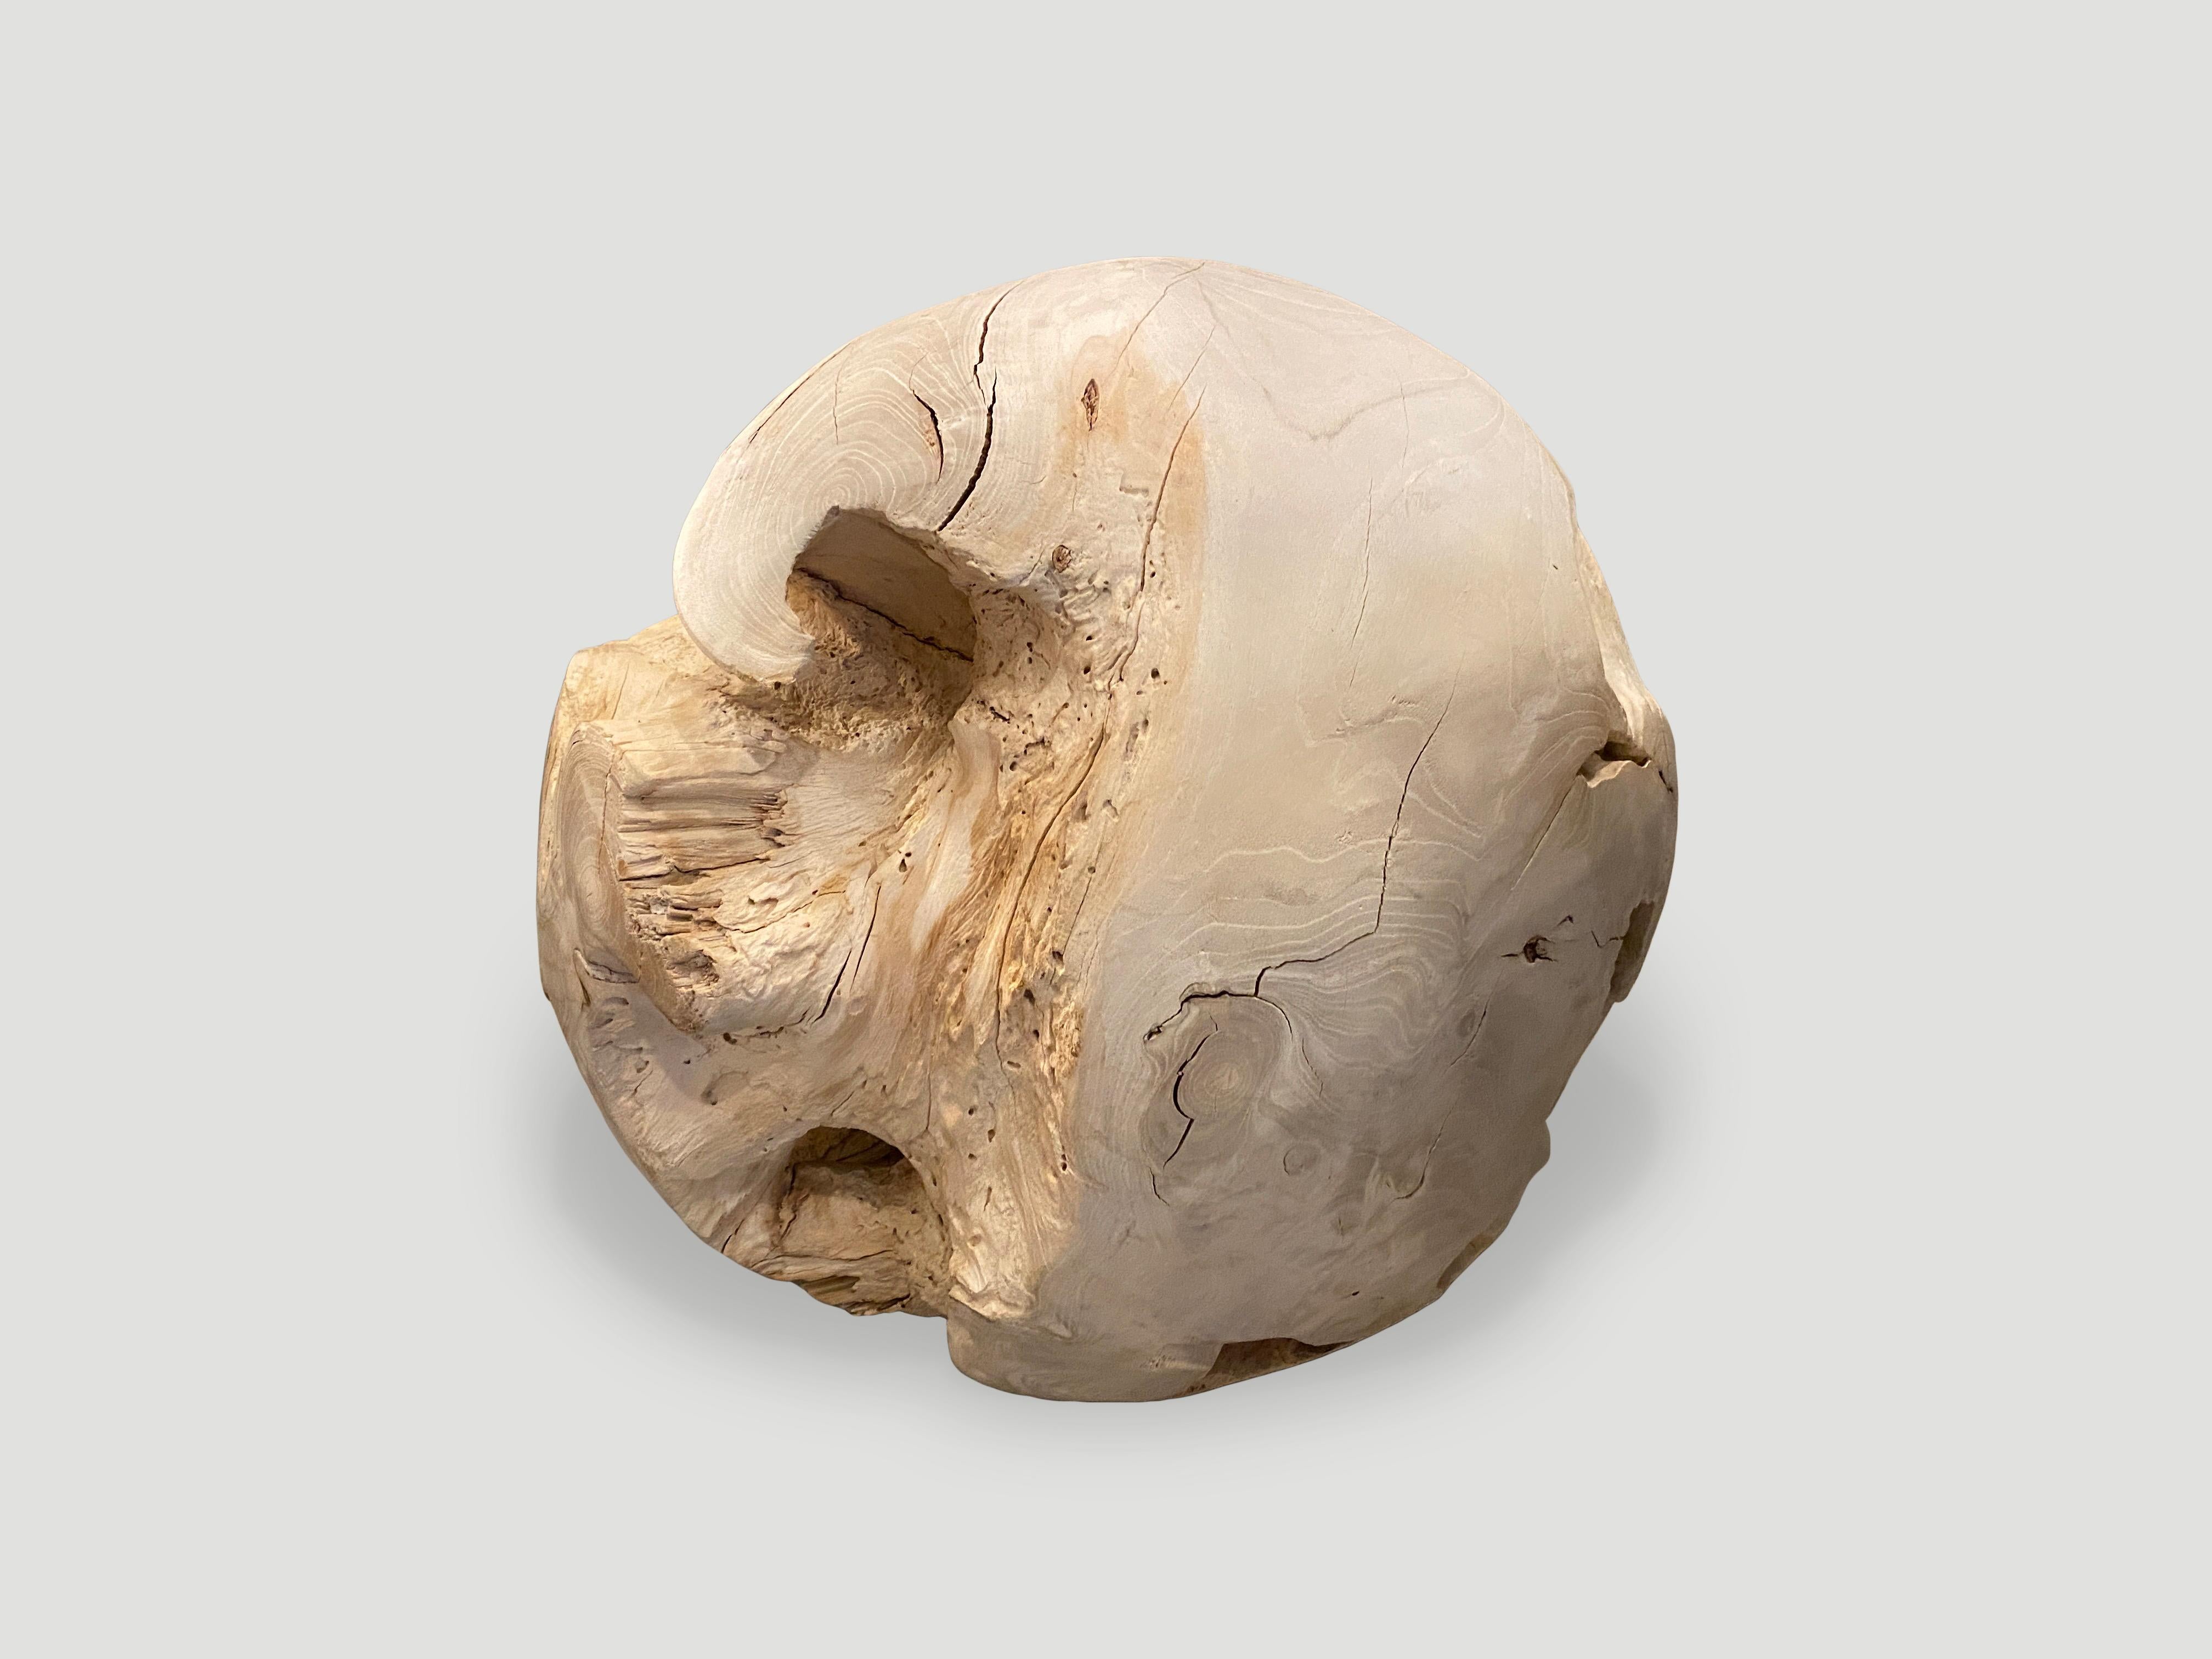 Beautiful organic reclaimed teak wood root, bleached and shaped into a sphere. A unique sculpture standing alone or in a group setting. Also available natural and charred. Custom sizes available. Please inquire. The size and price reflect the one